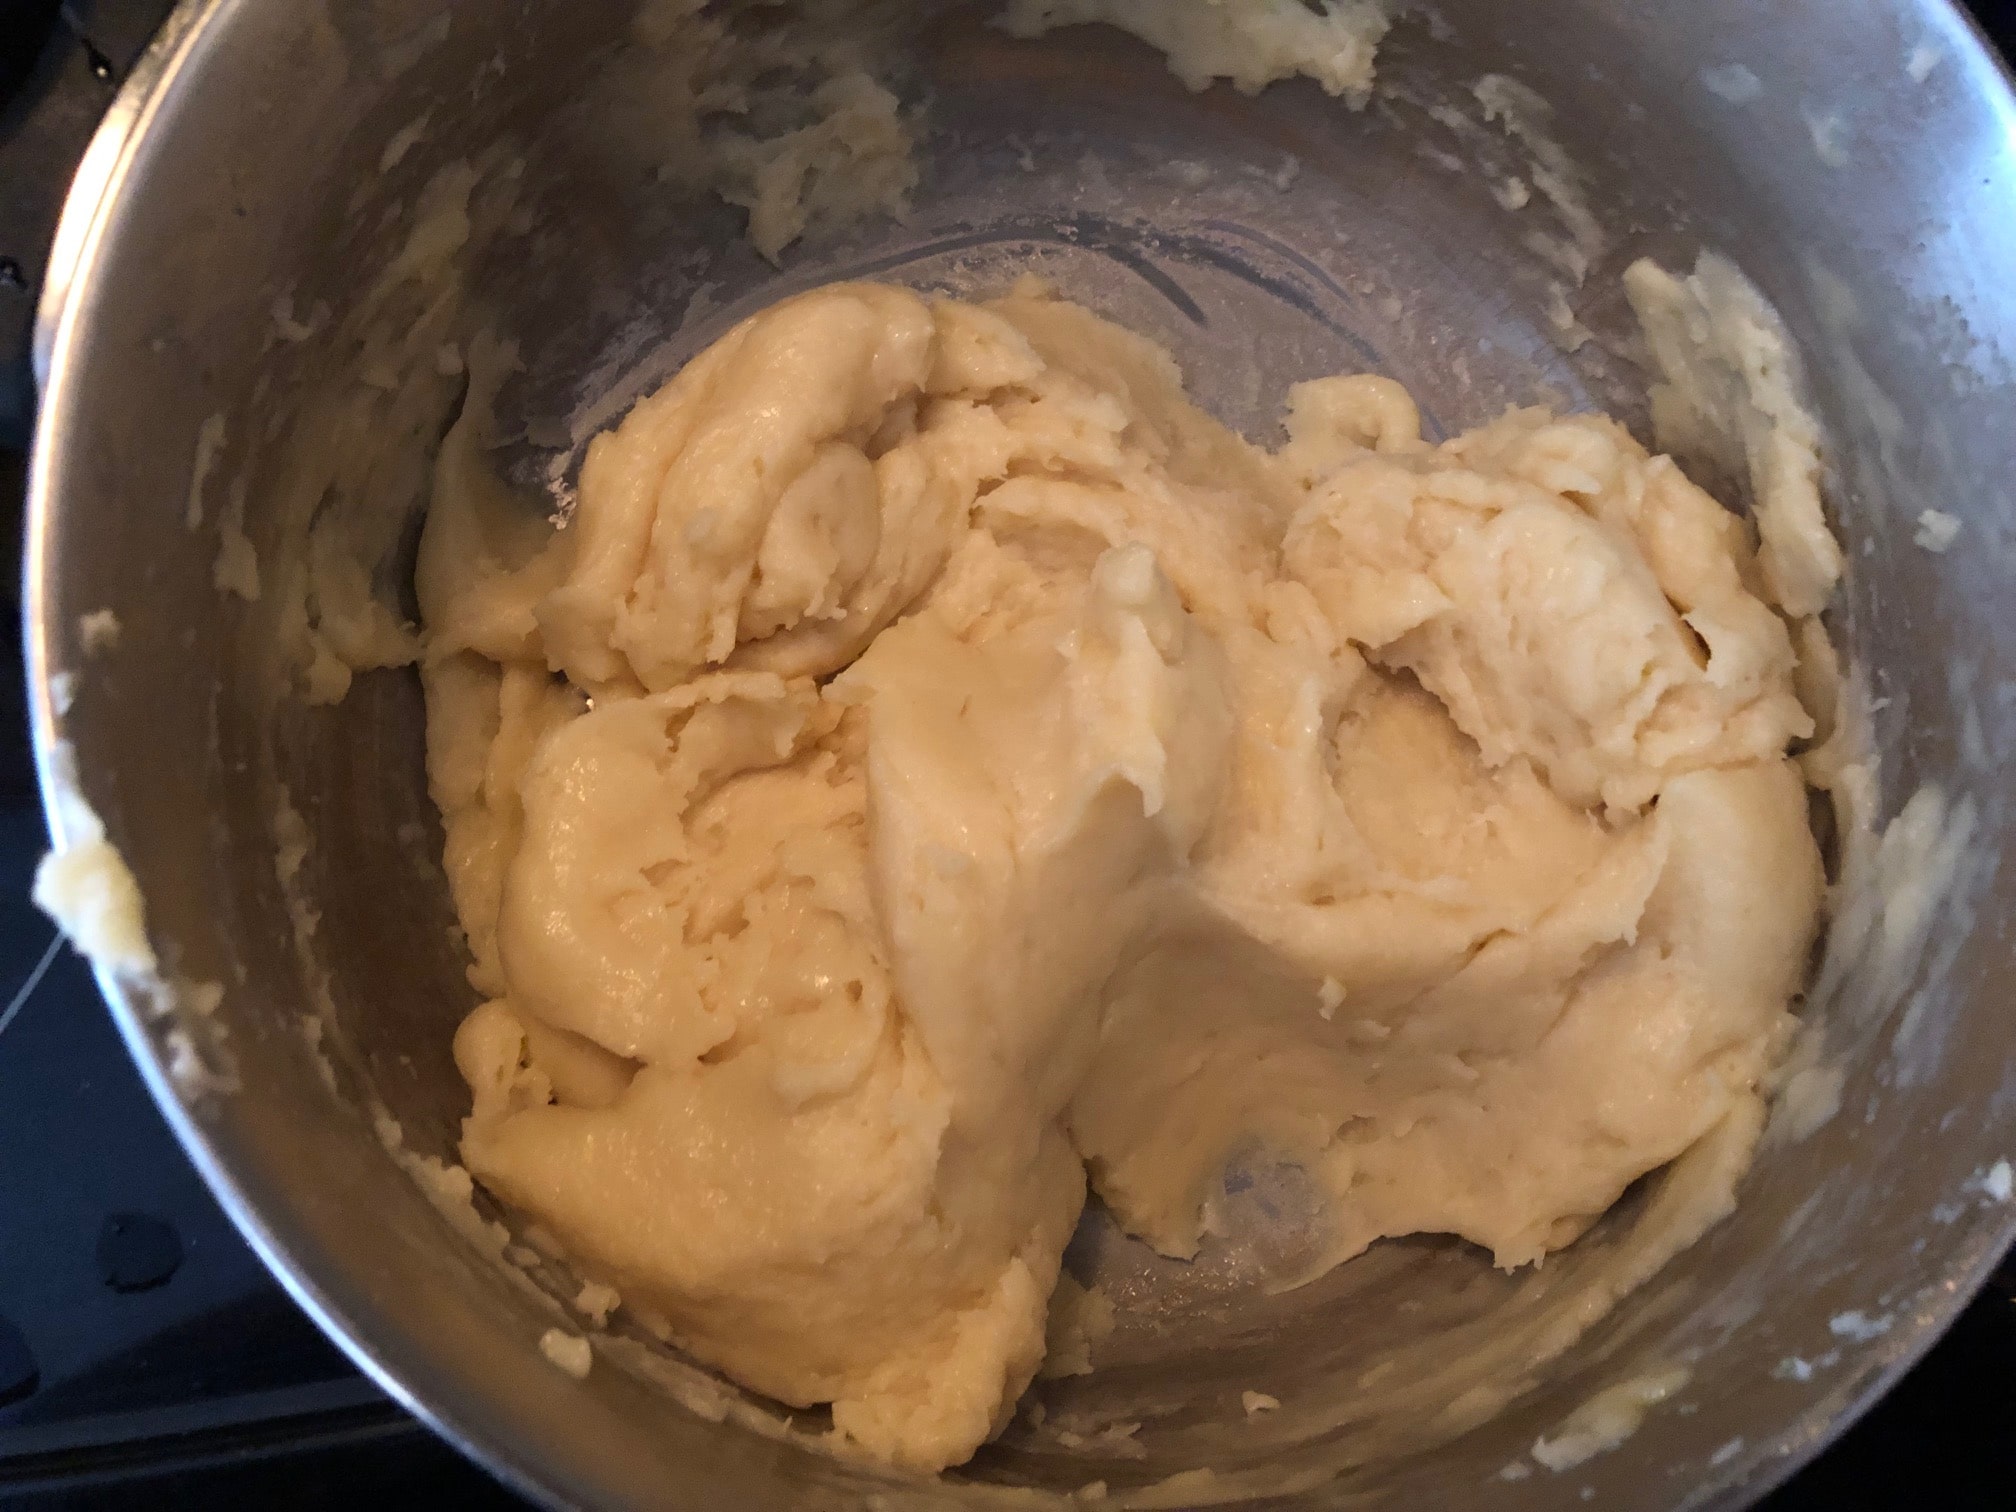 pastry in pot looks silky like mashed potatoes